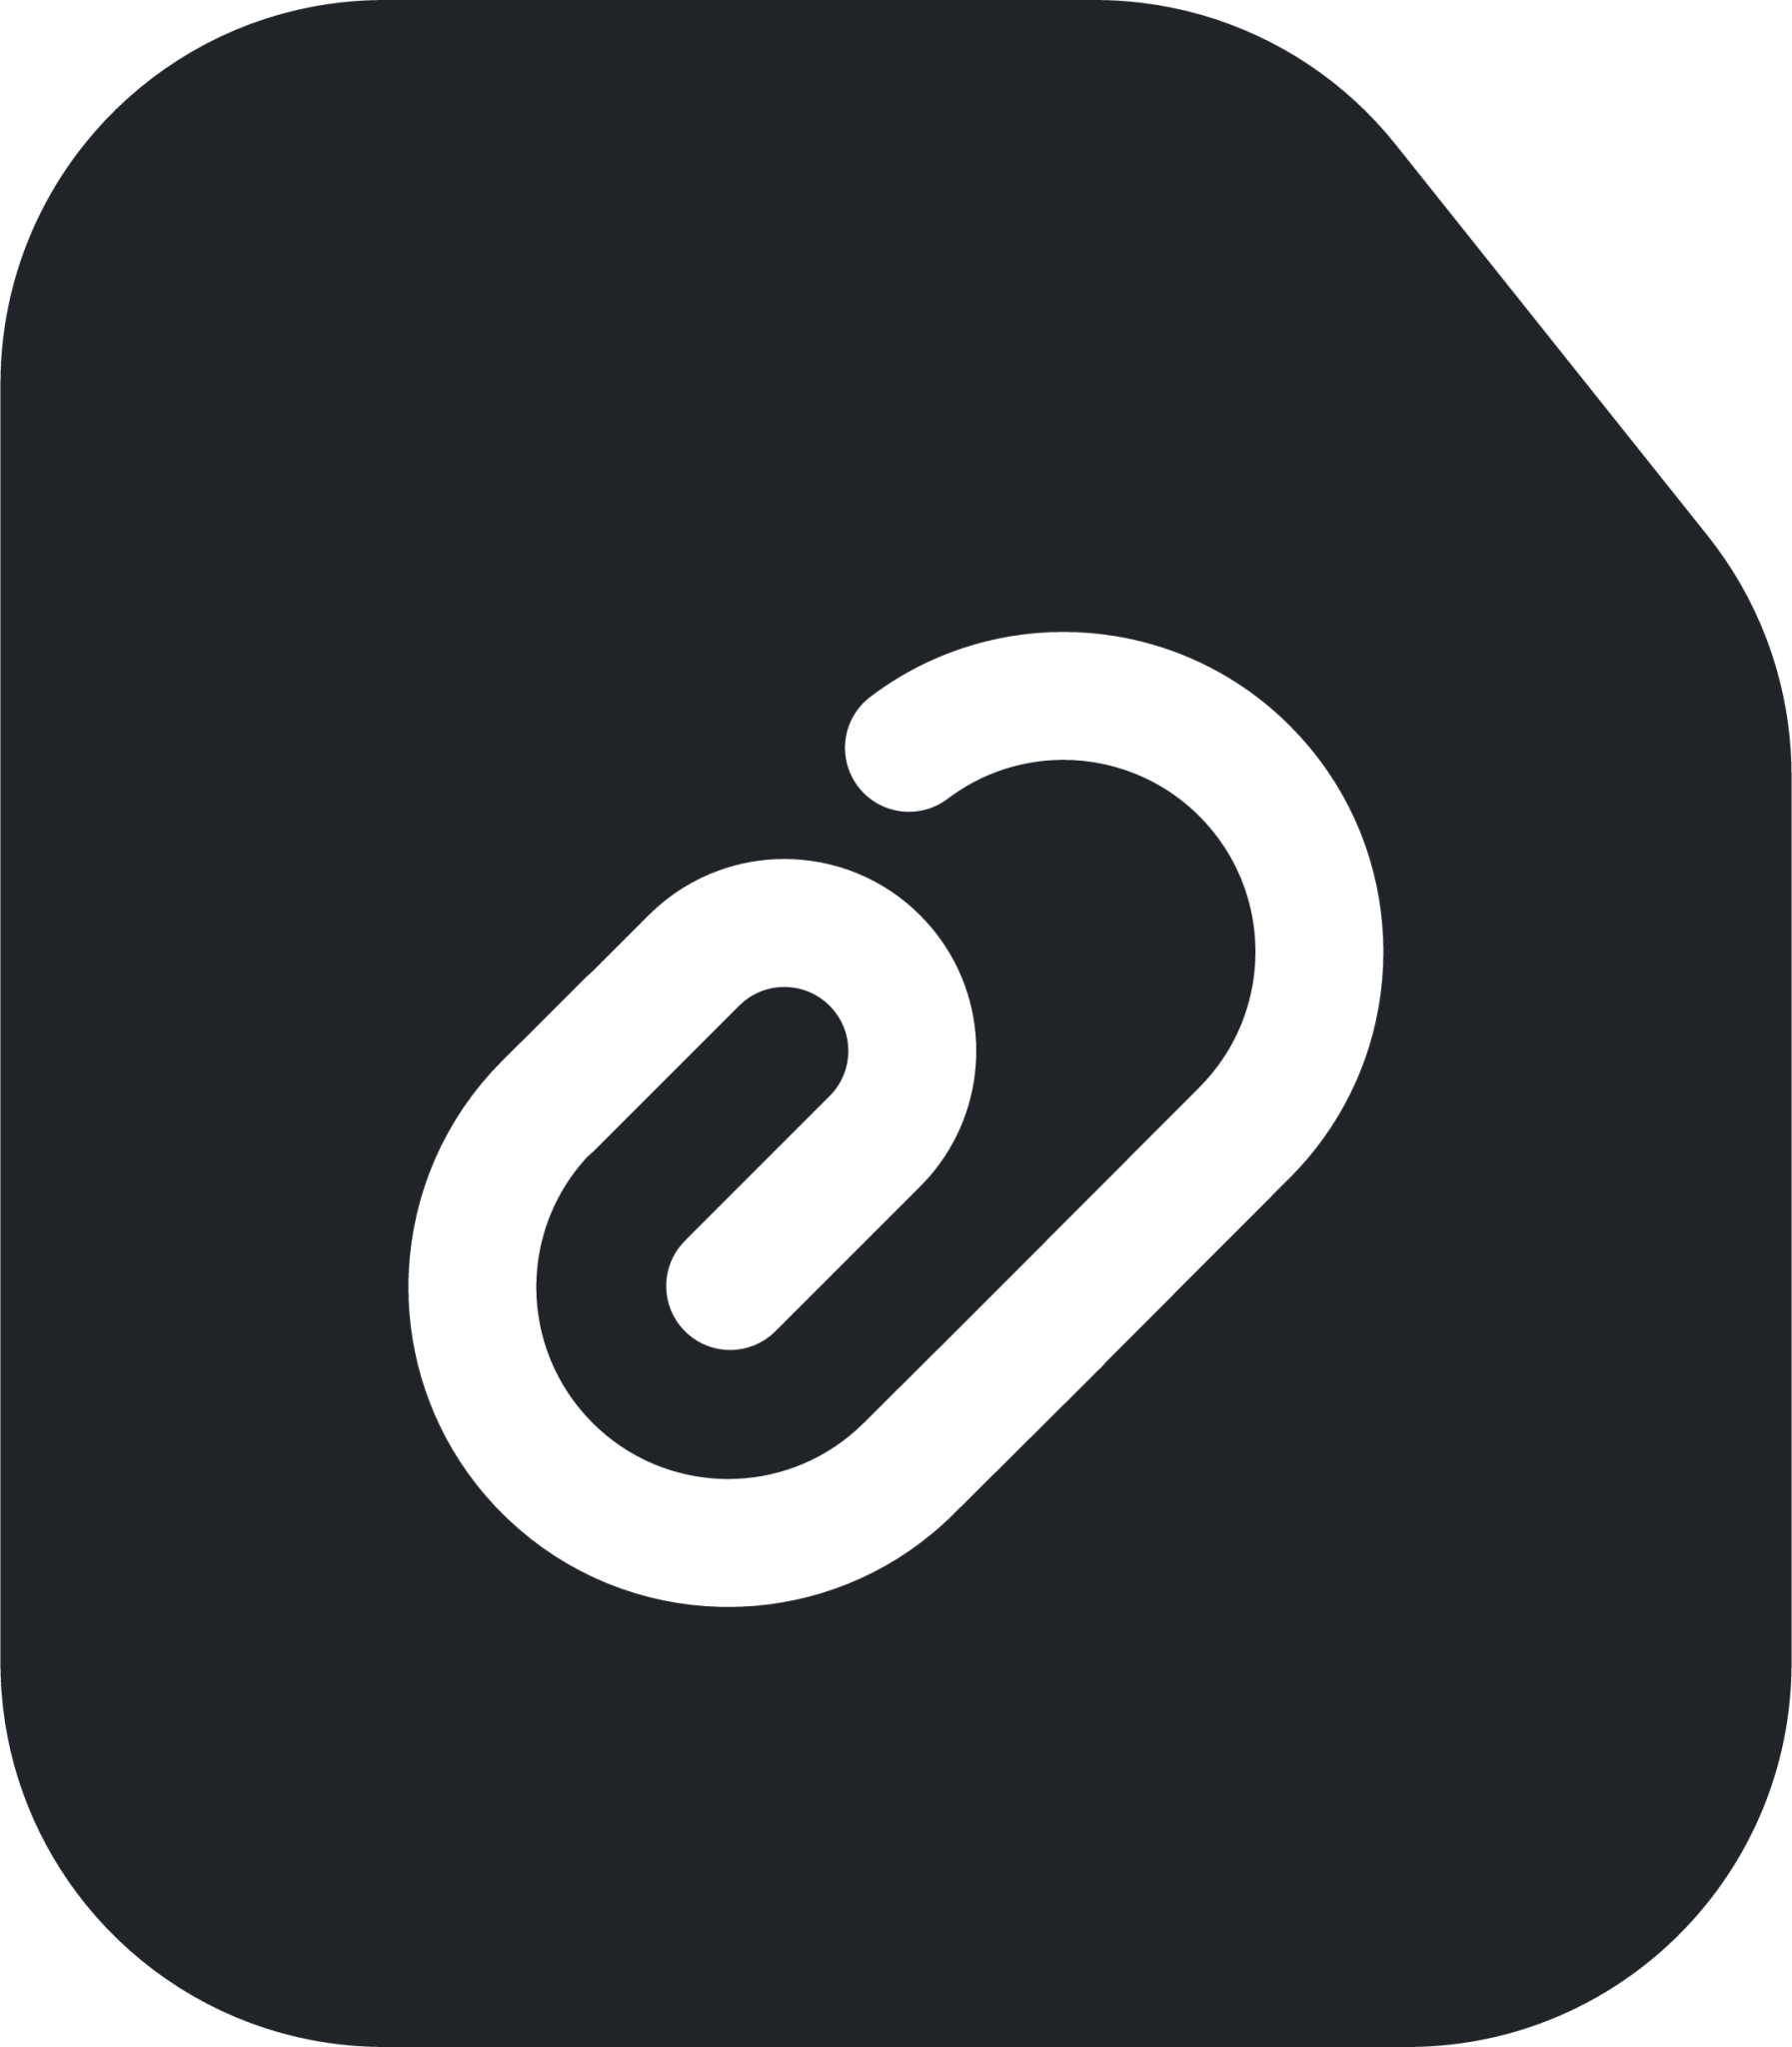 attachfile (rounded filled) icon